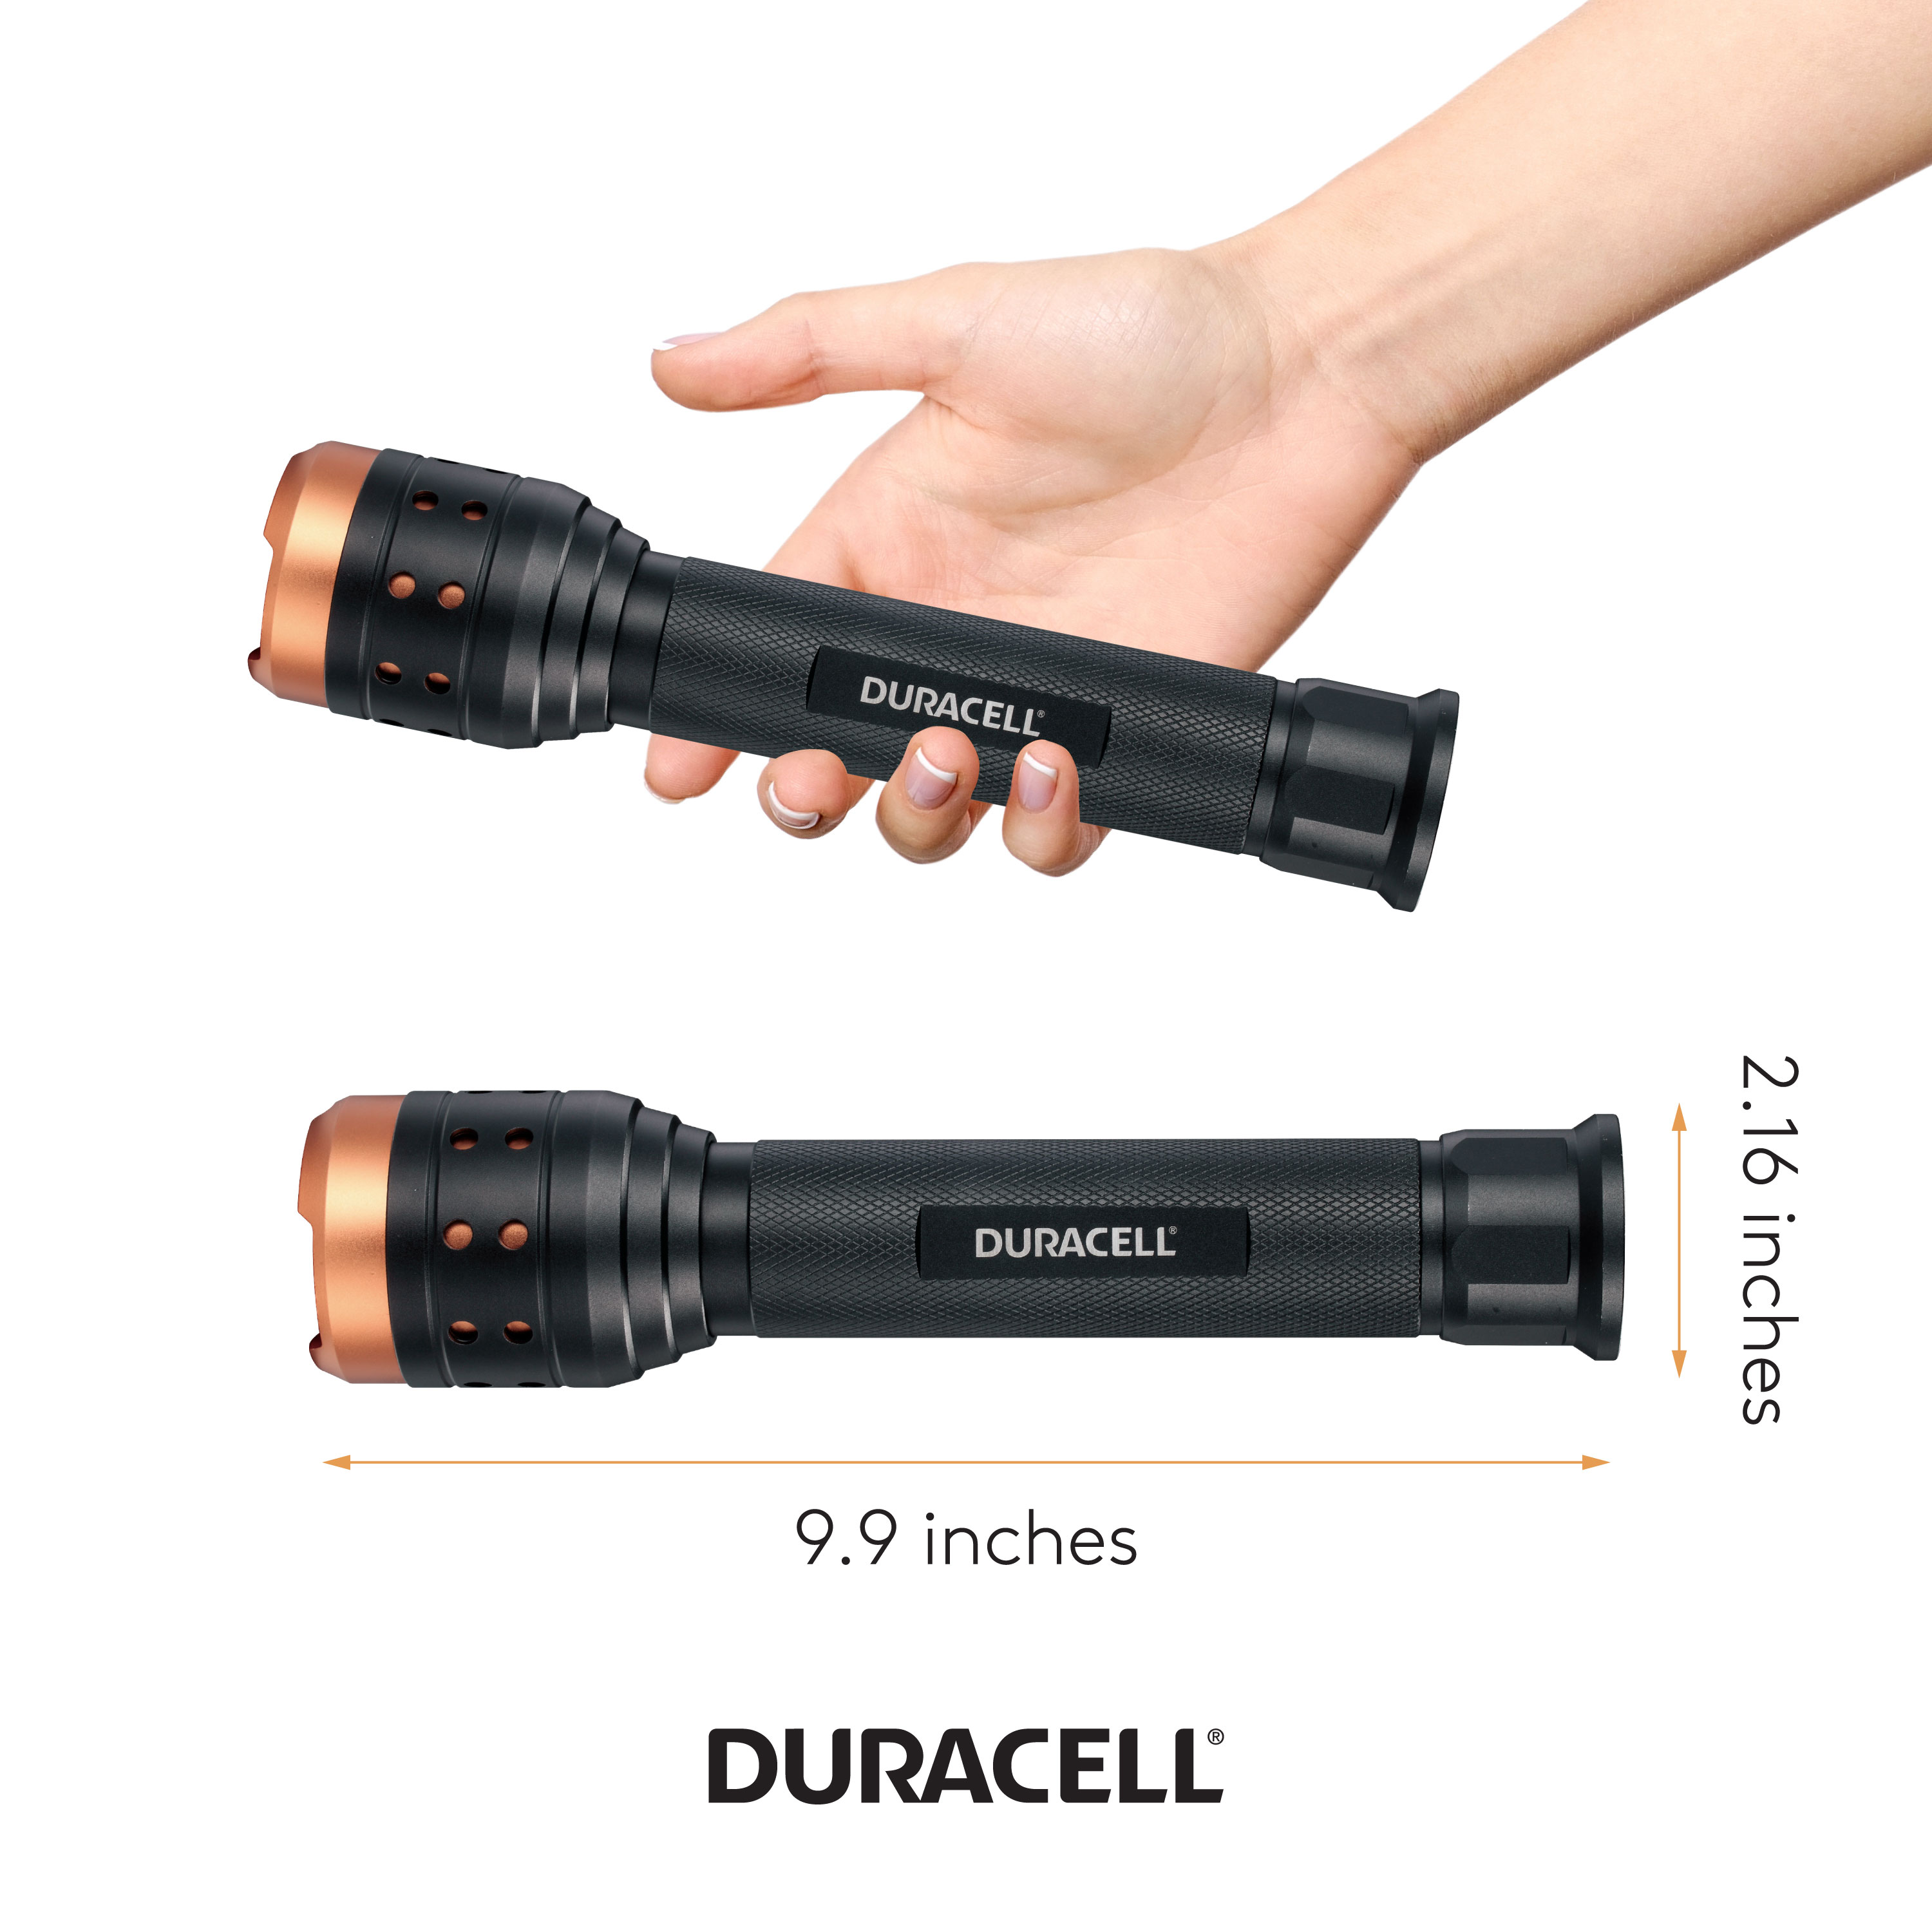 Duracell Universal Series LED Flashlight Torch NEW 